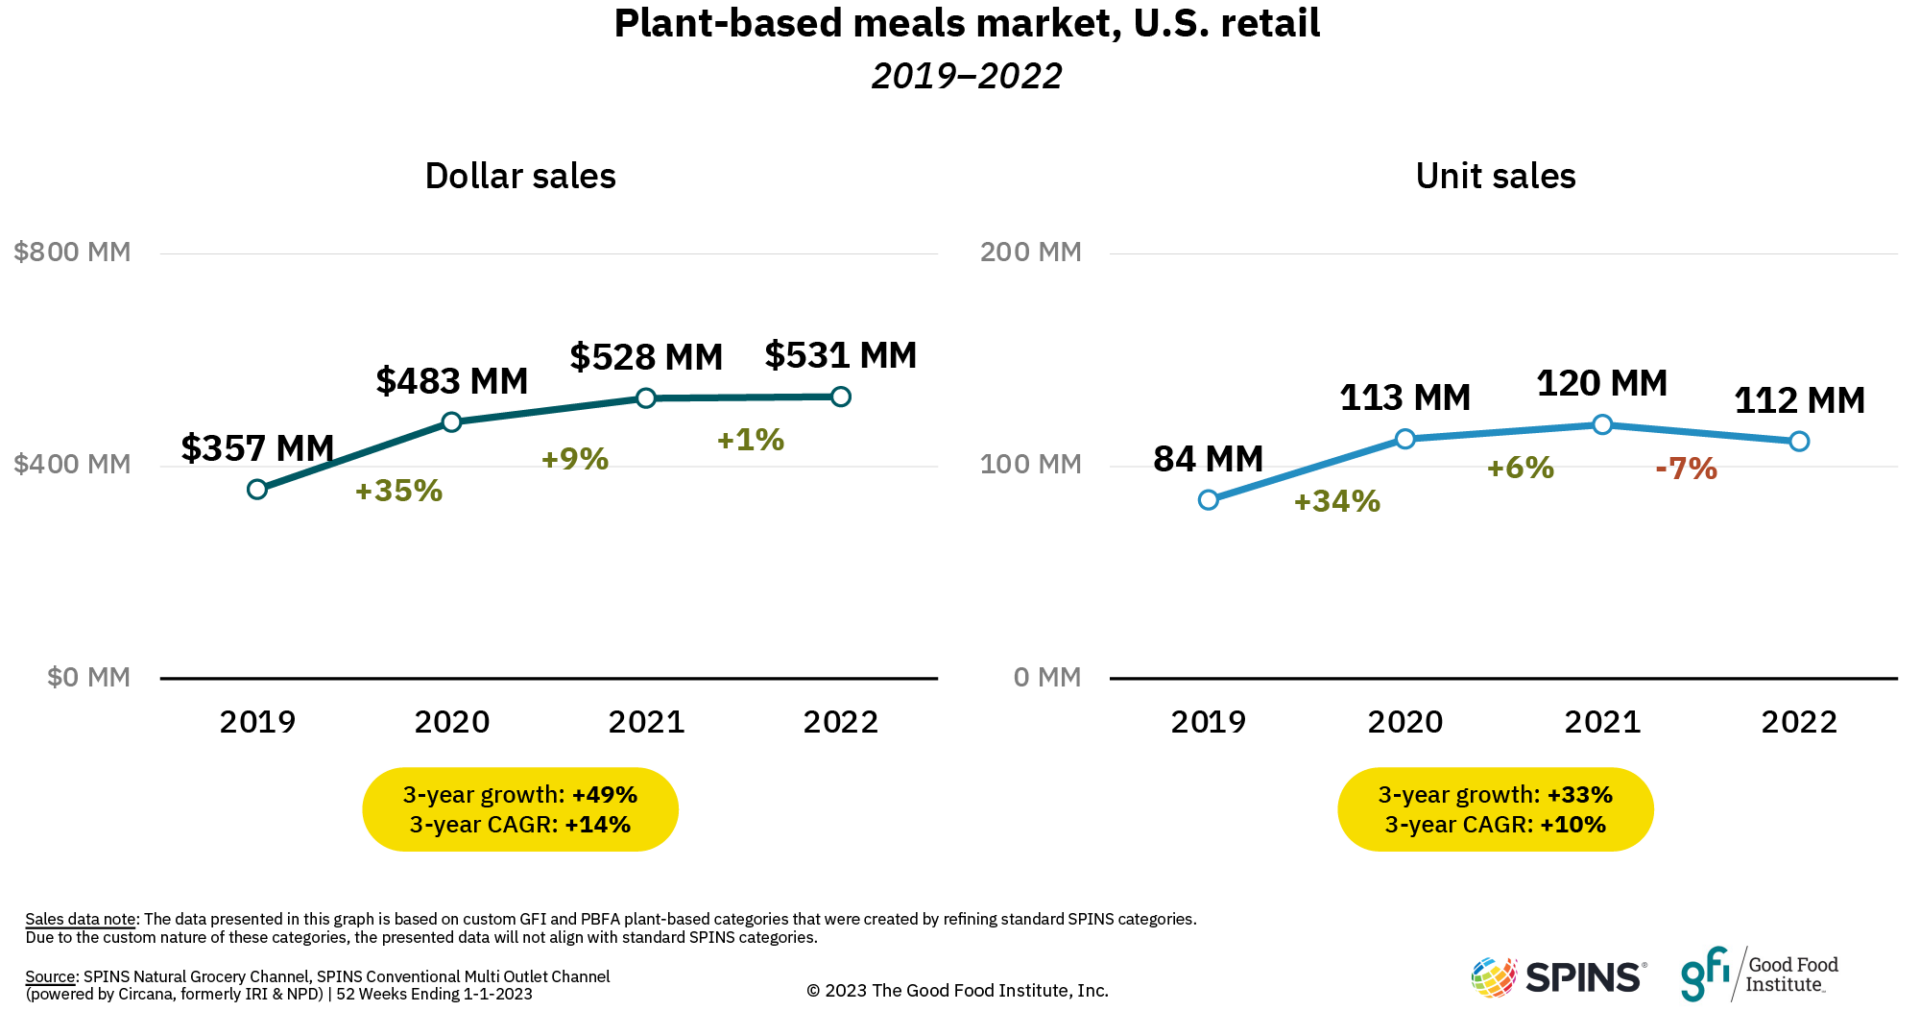 Summary of plant-based meals sales data